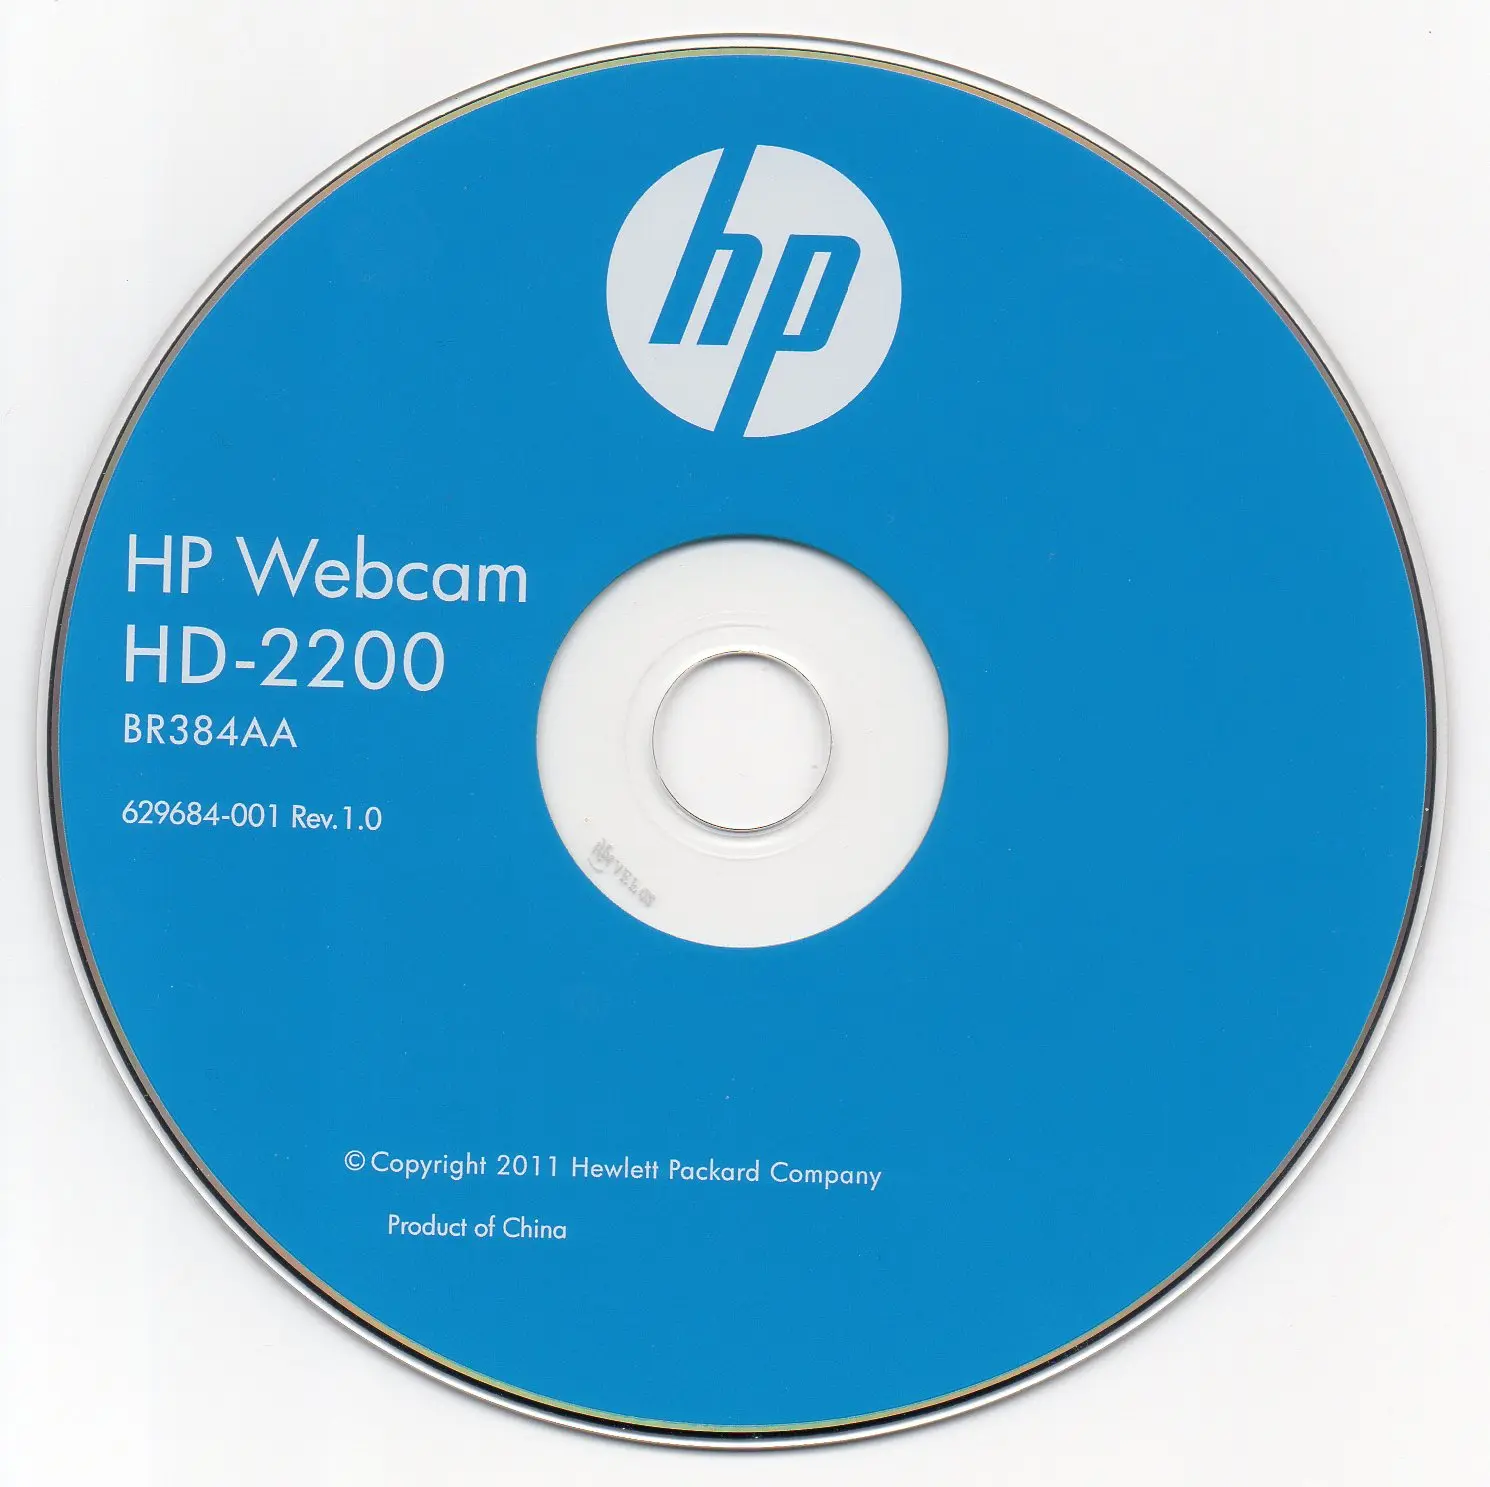 hewlett packard webcam download - How do I download and install webcam drivers